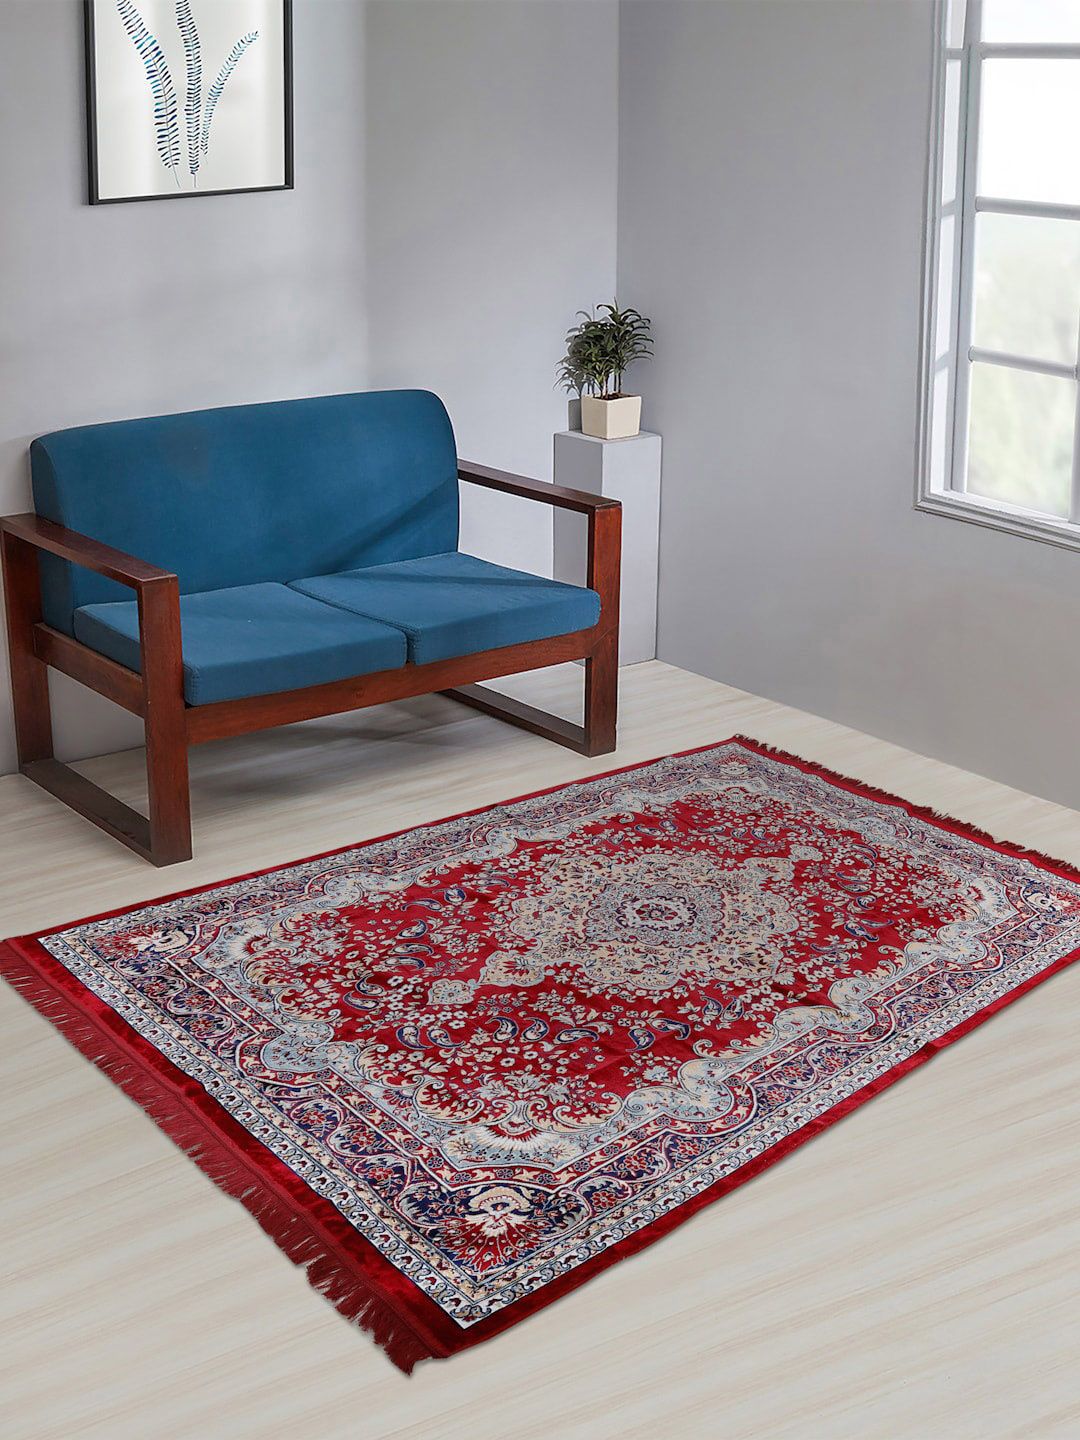 KLOTTHE Maroon & Blue Floral Printed Handmade Cotton Traditional Carpet Price in India